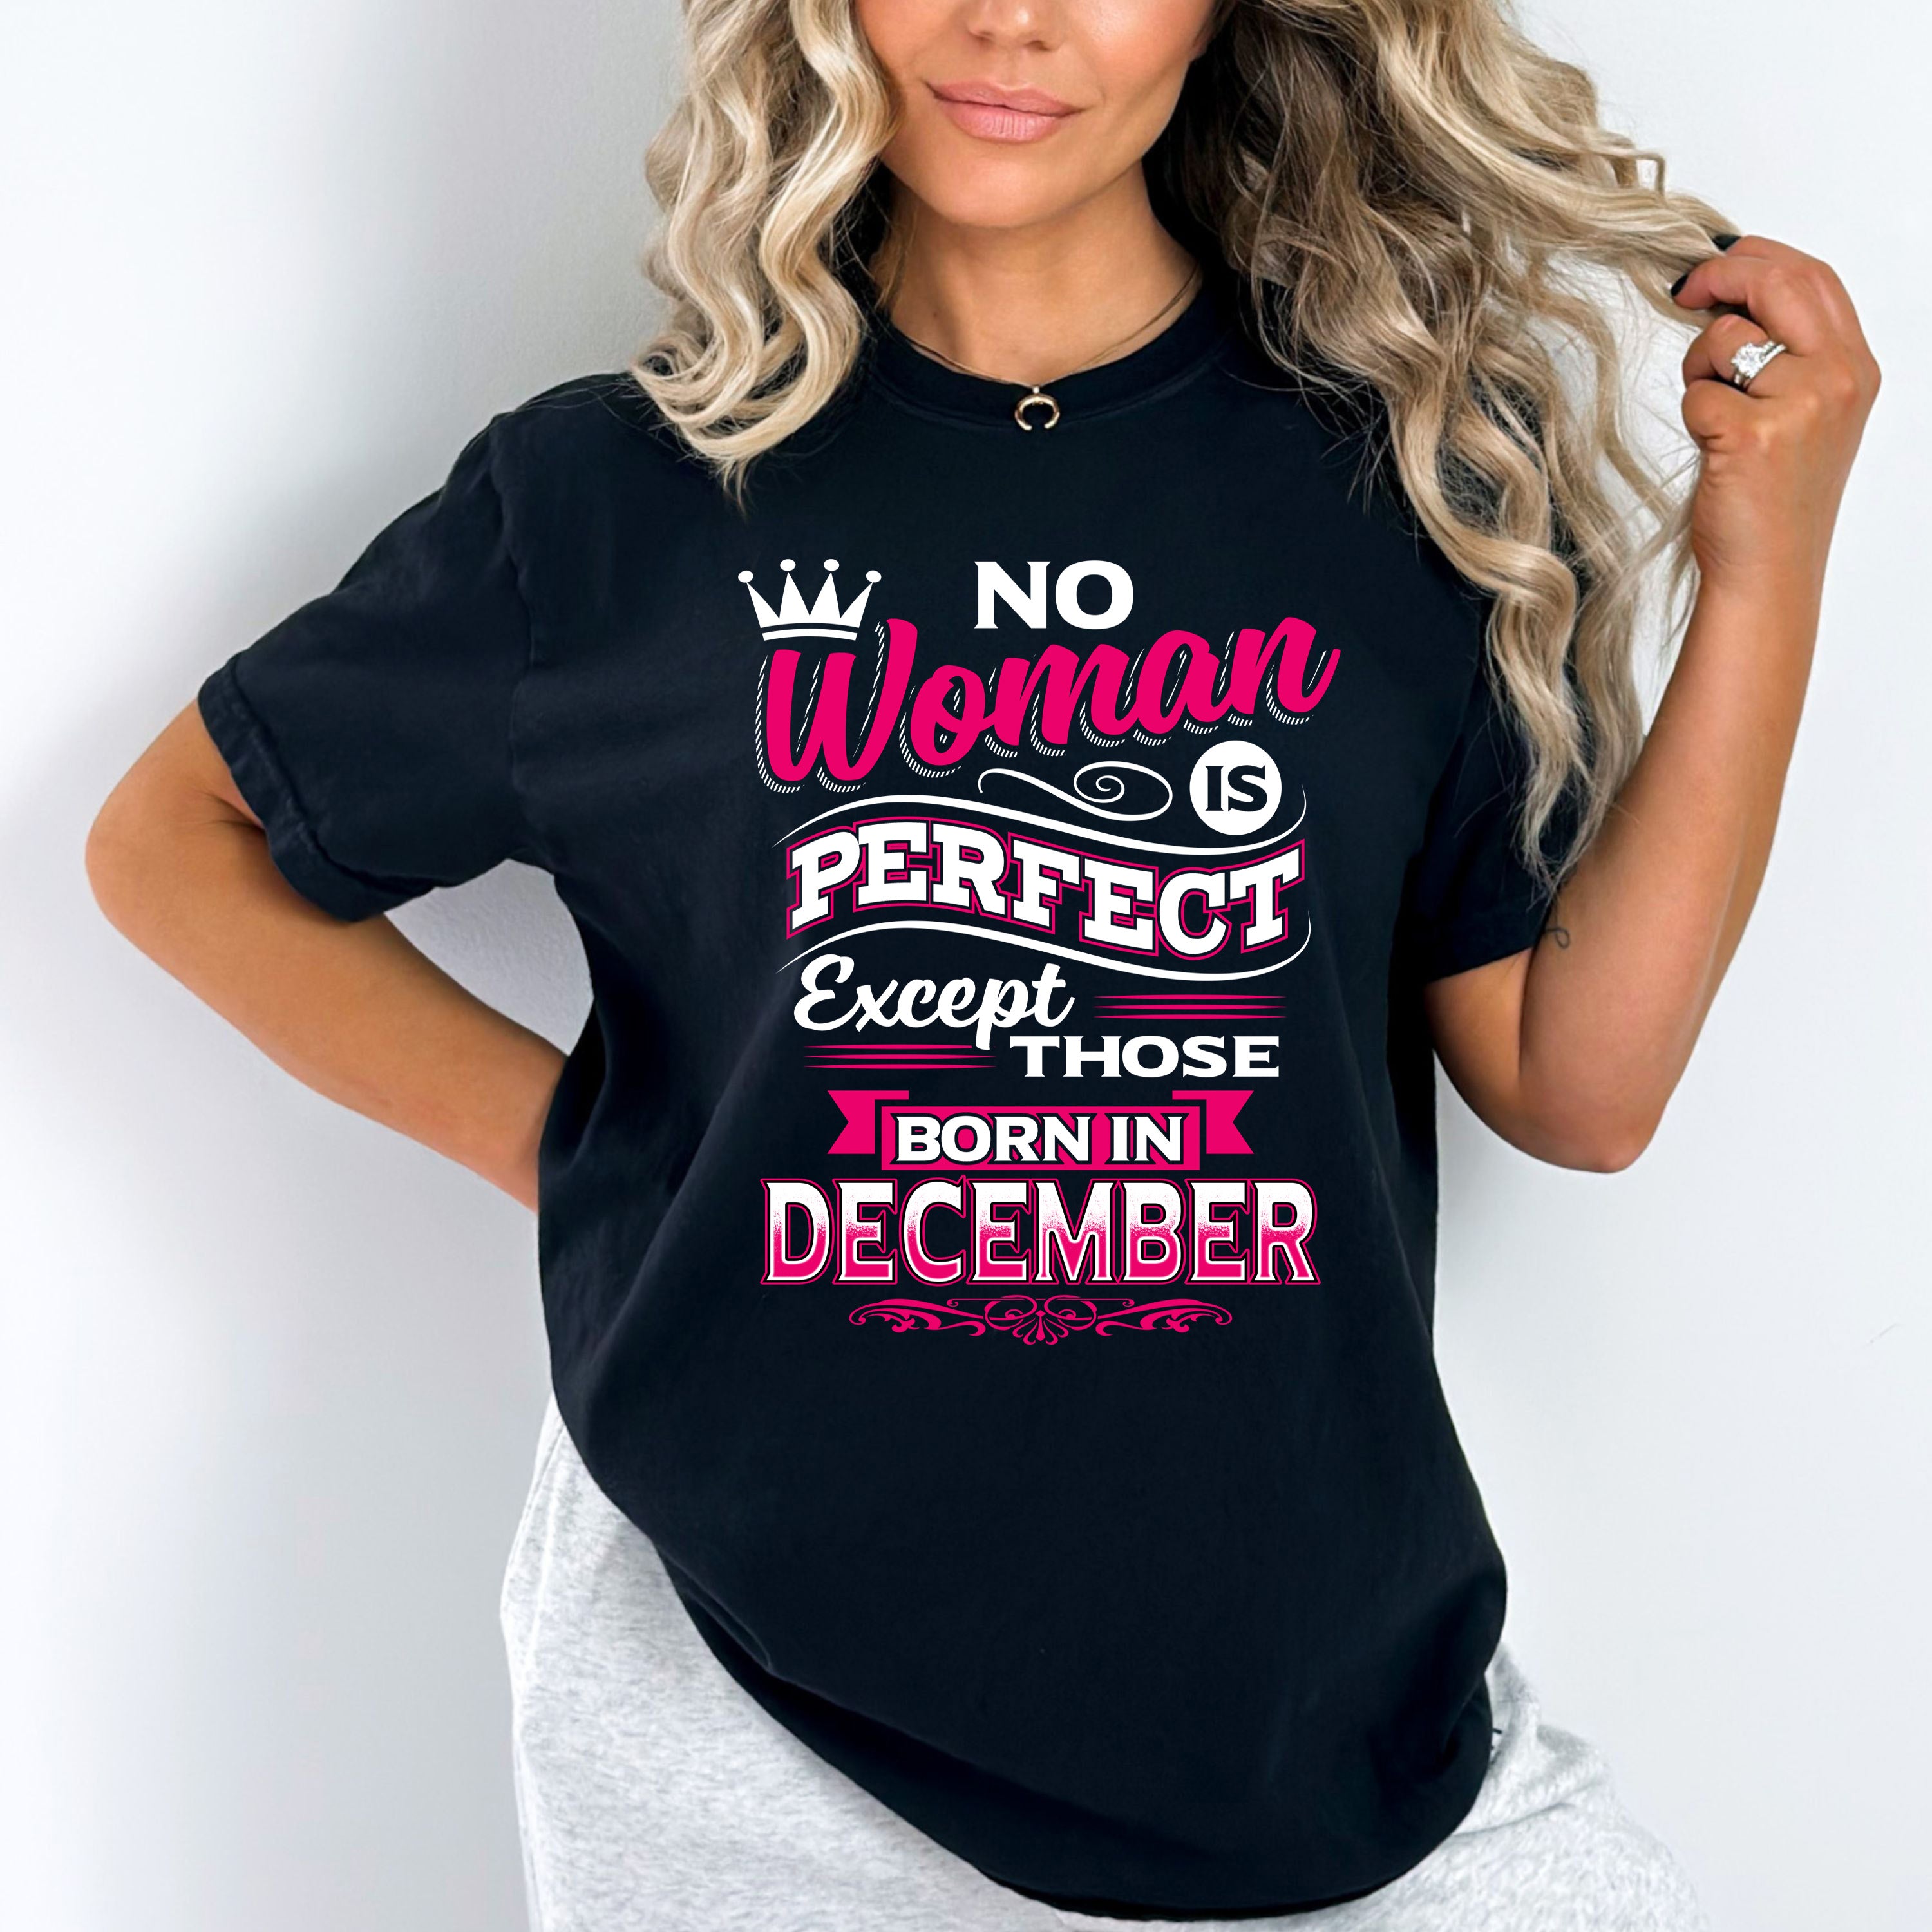 "No Woman Is Perfect Except Those Born In December"- Grey & Black